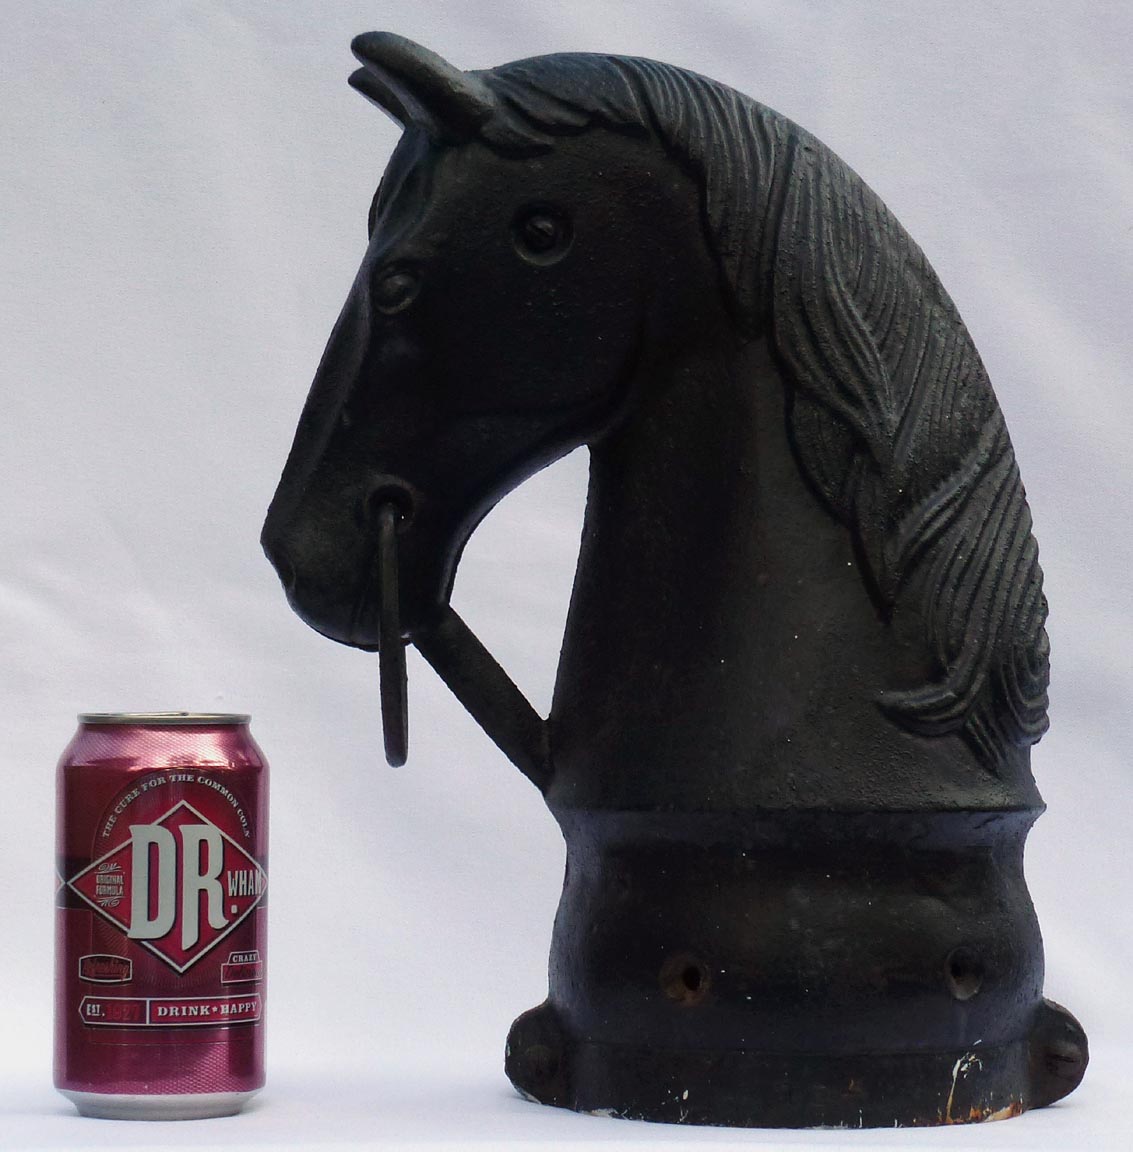 Cast iron horse head hitching post